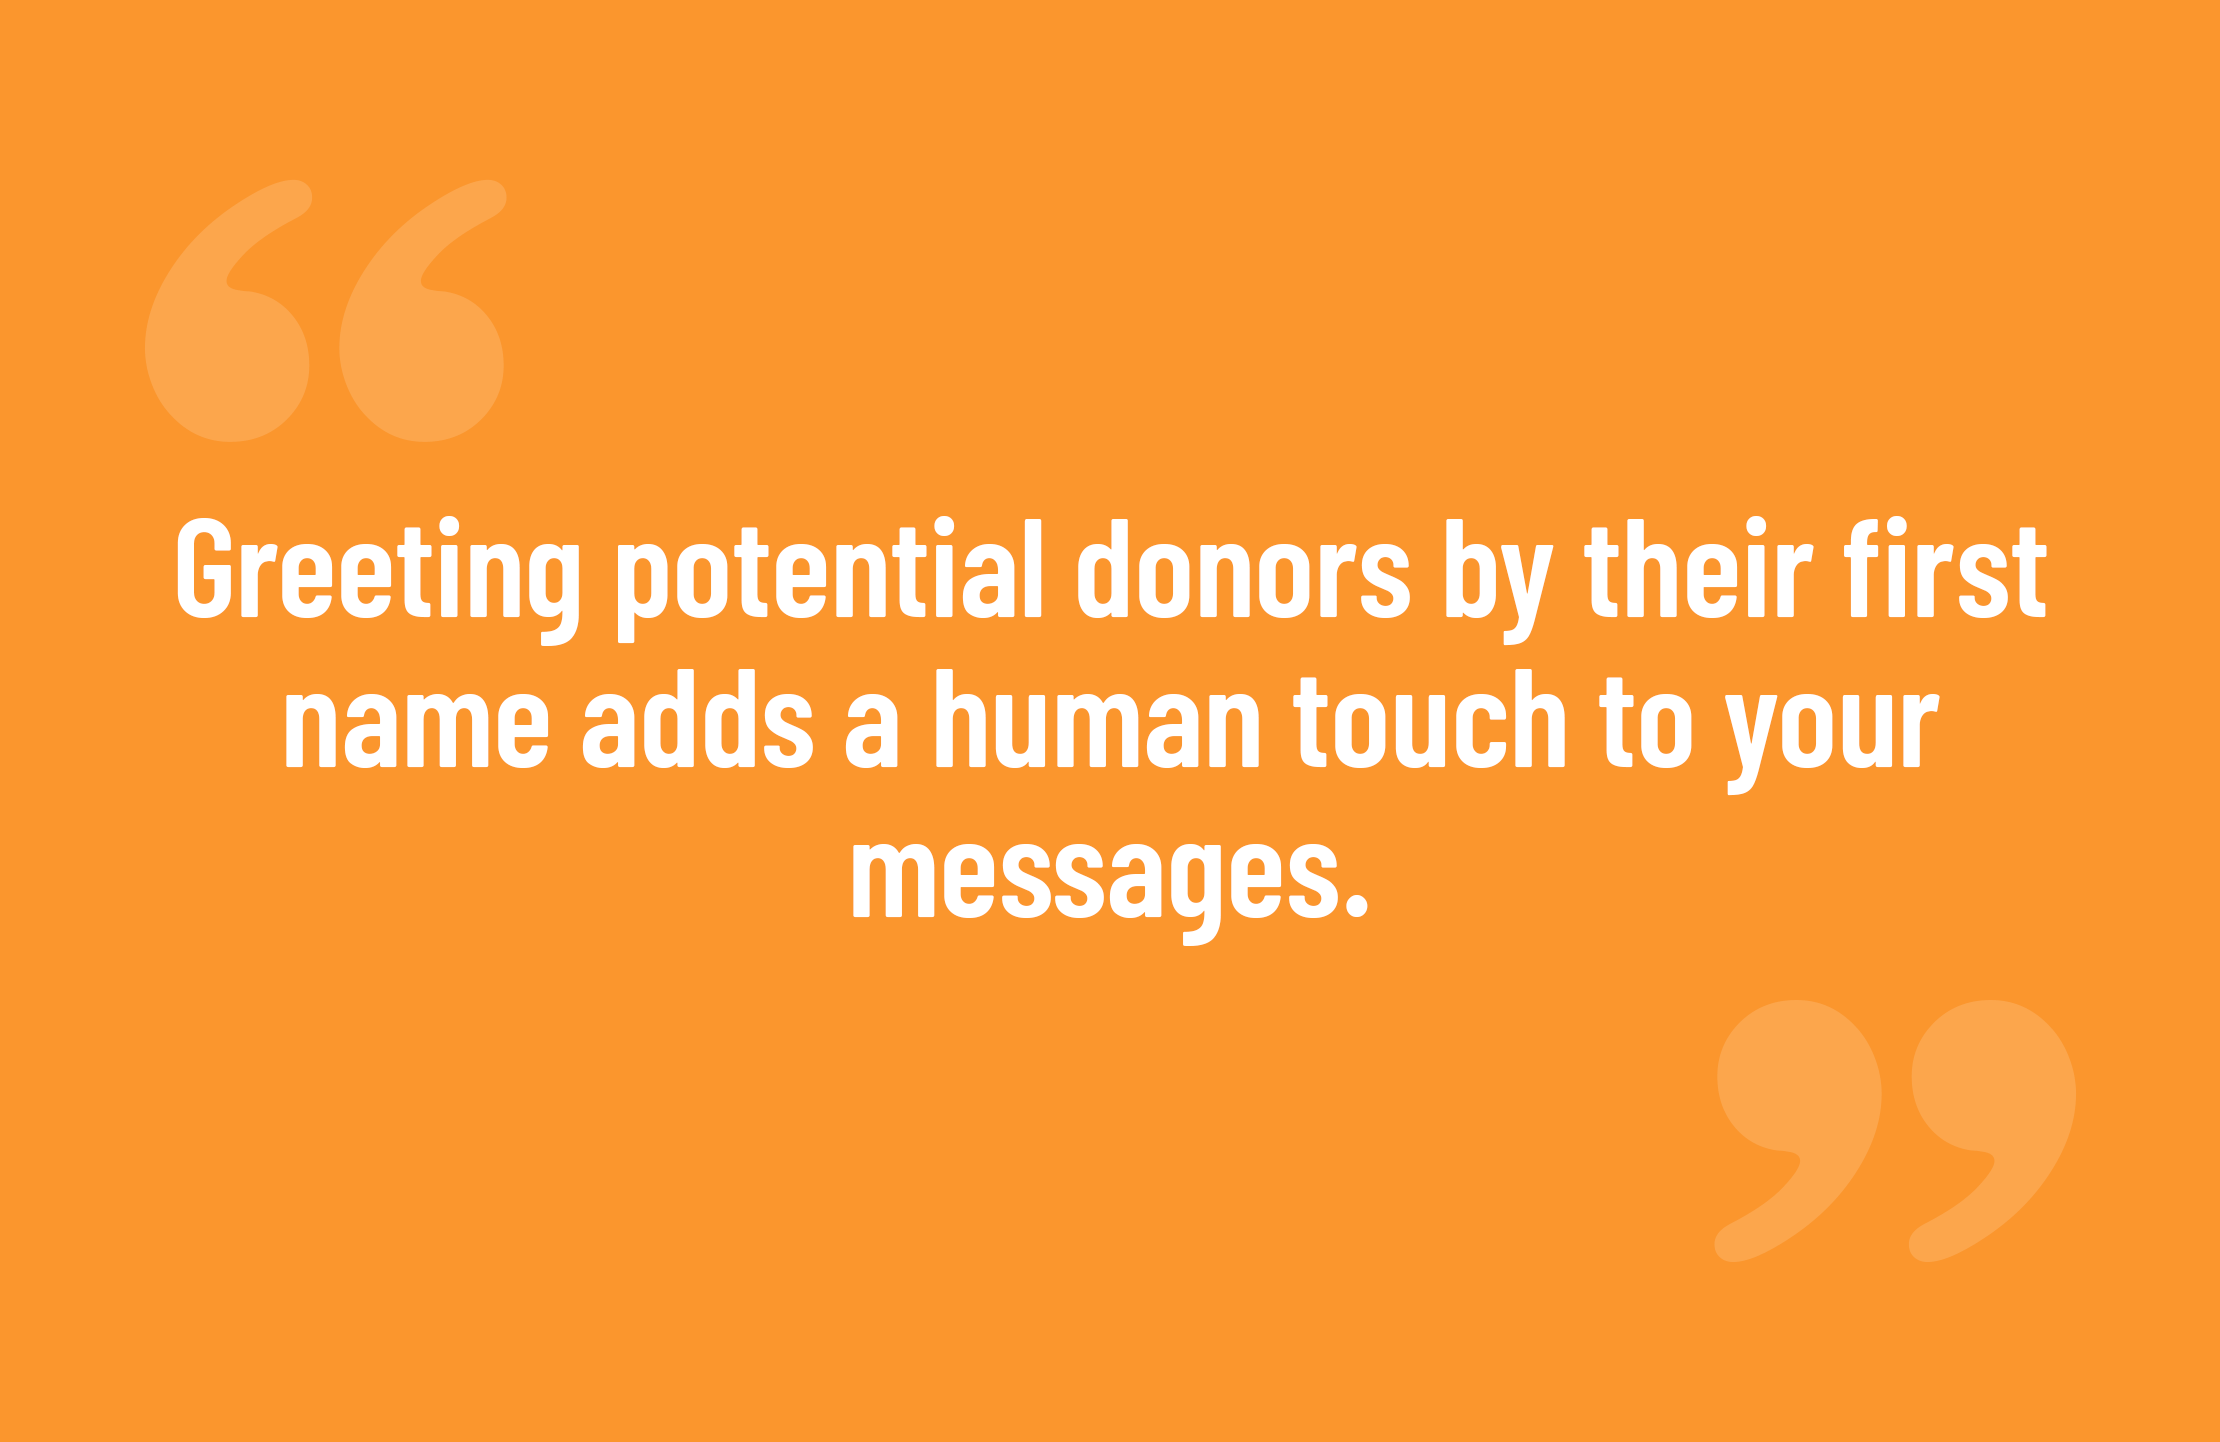 Greeting potential donors by their first name adds a human touch to your messages